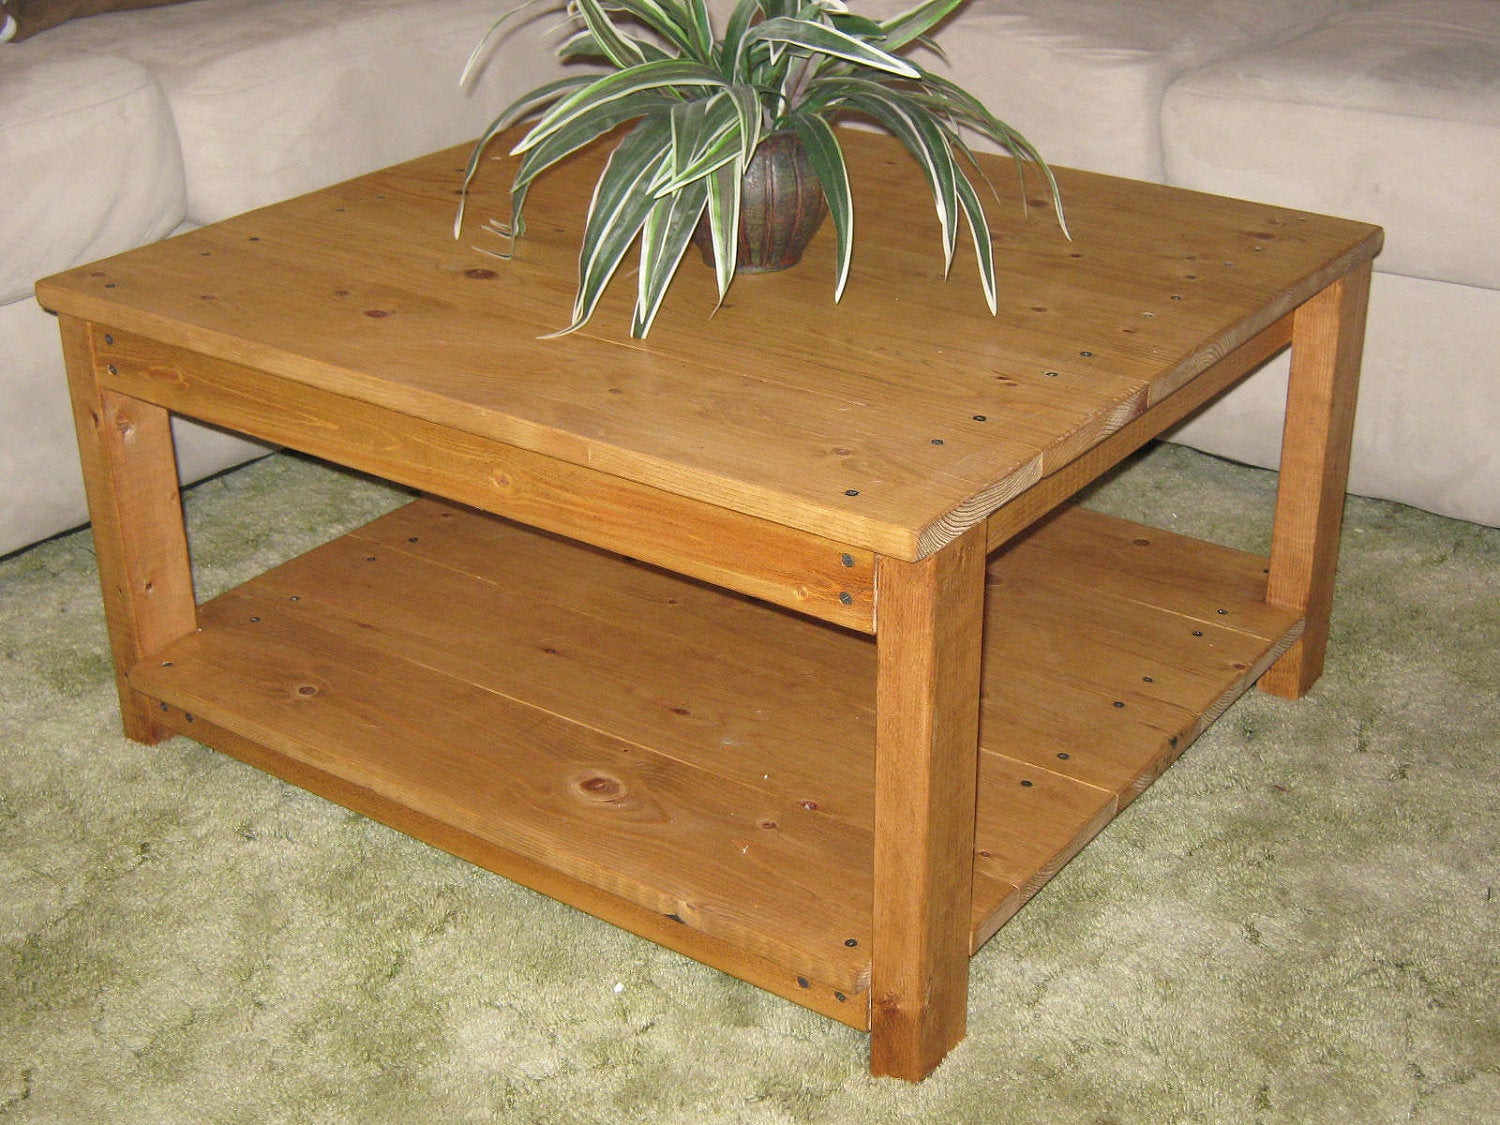 DIY Wood Coffee Tables
 DIY PLANS to make Square Wooden Coffee Table by wingstoshop